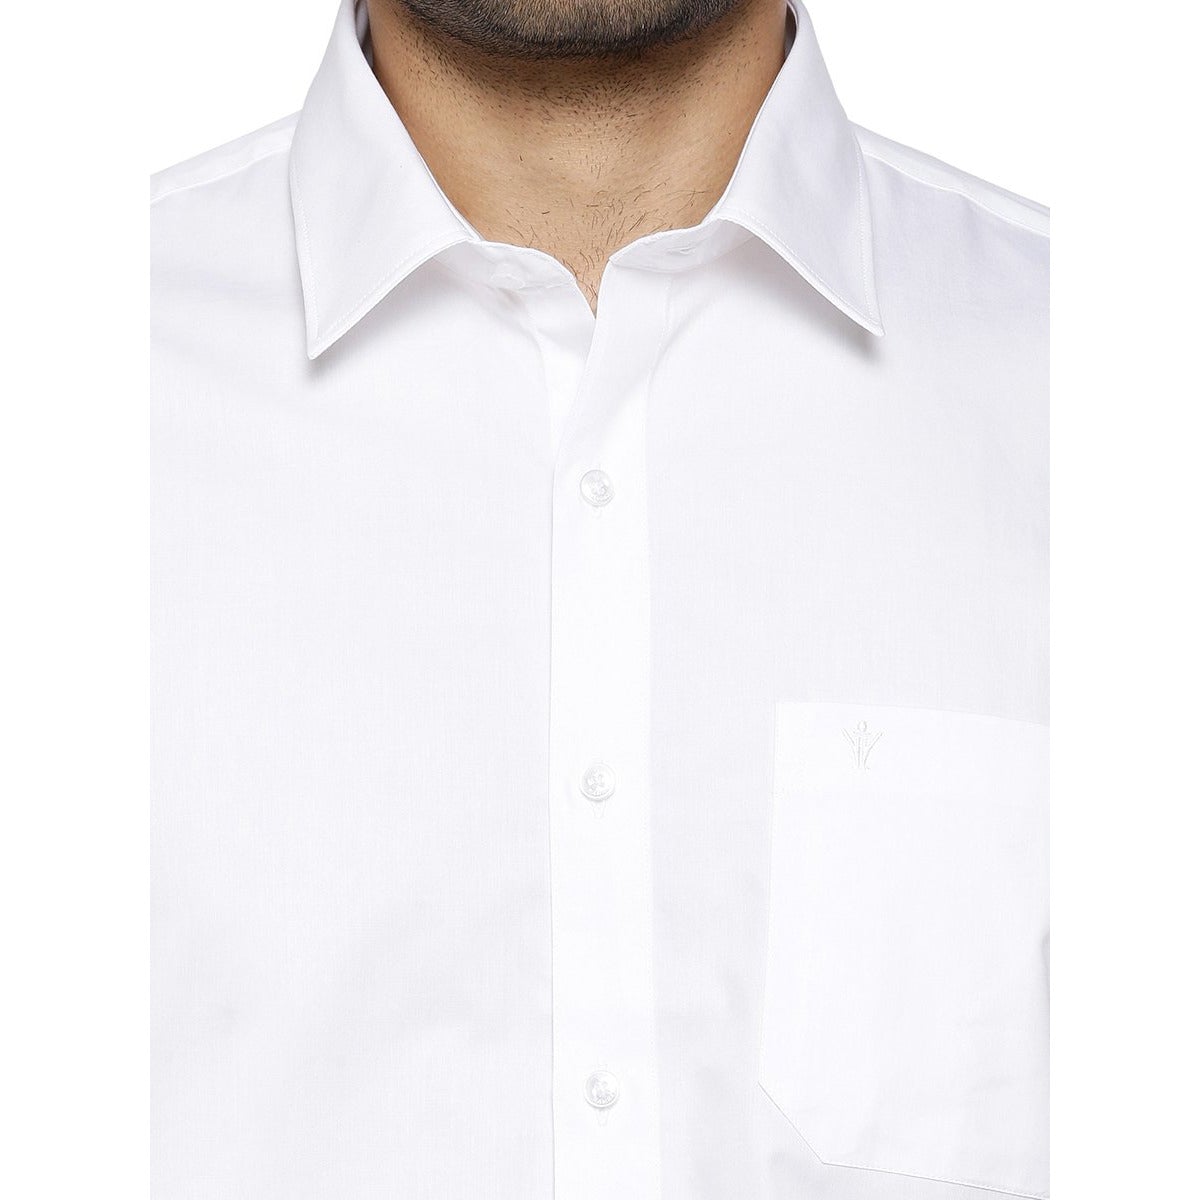 Mens 100% Cotton Full Sleeves White Shirt Super Faast -Zoom view